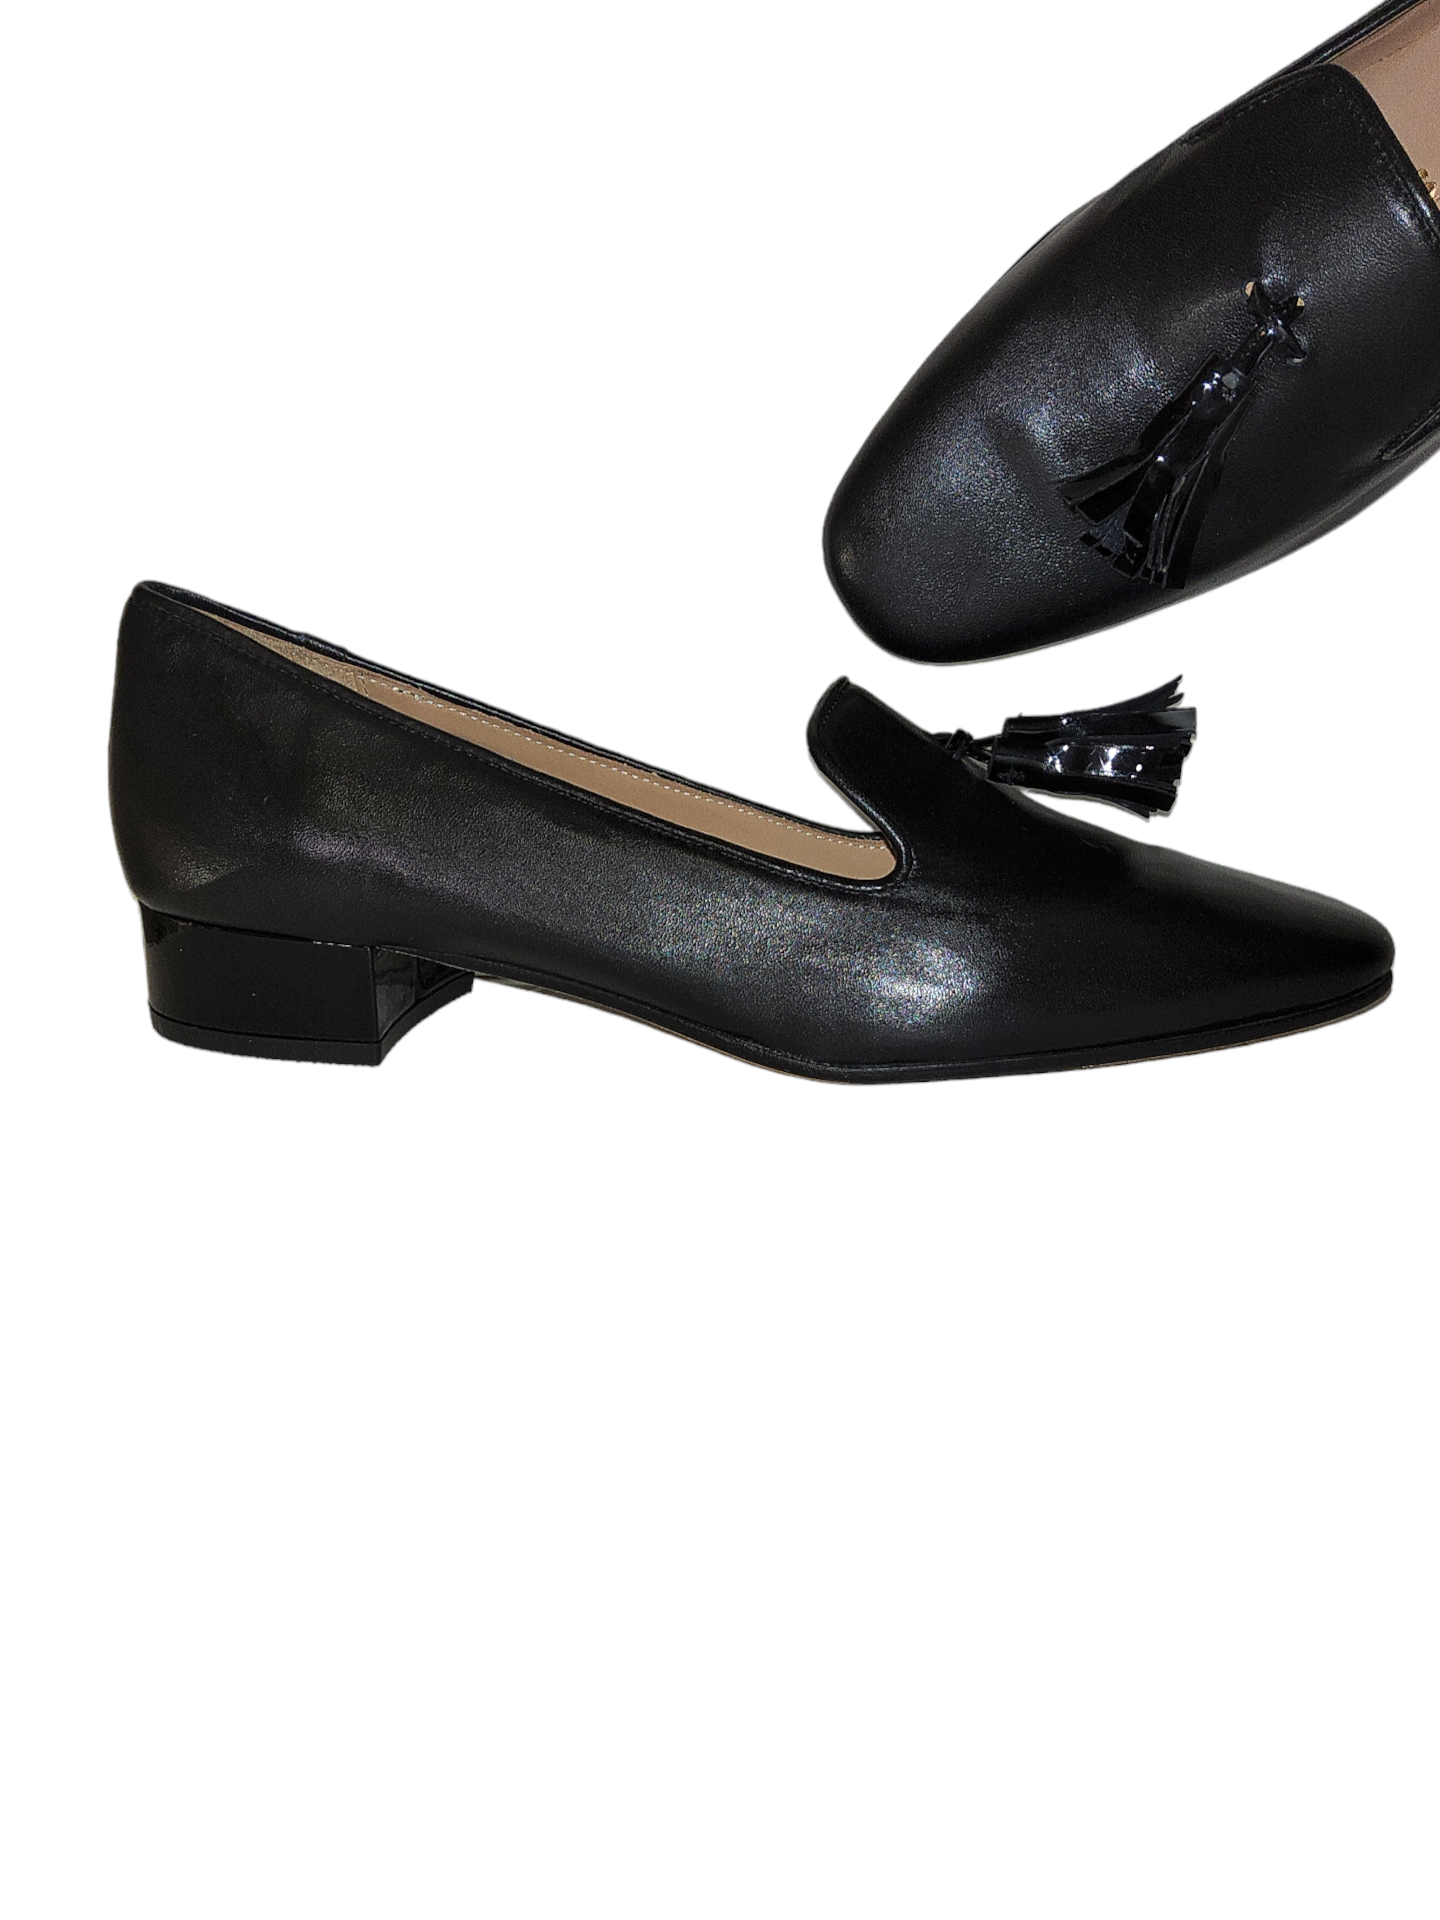 Black leather heeled loafers